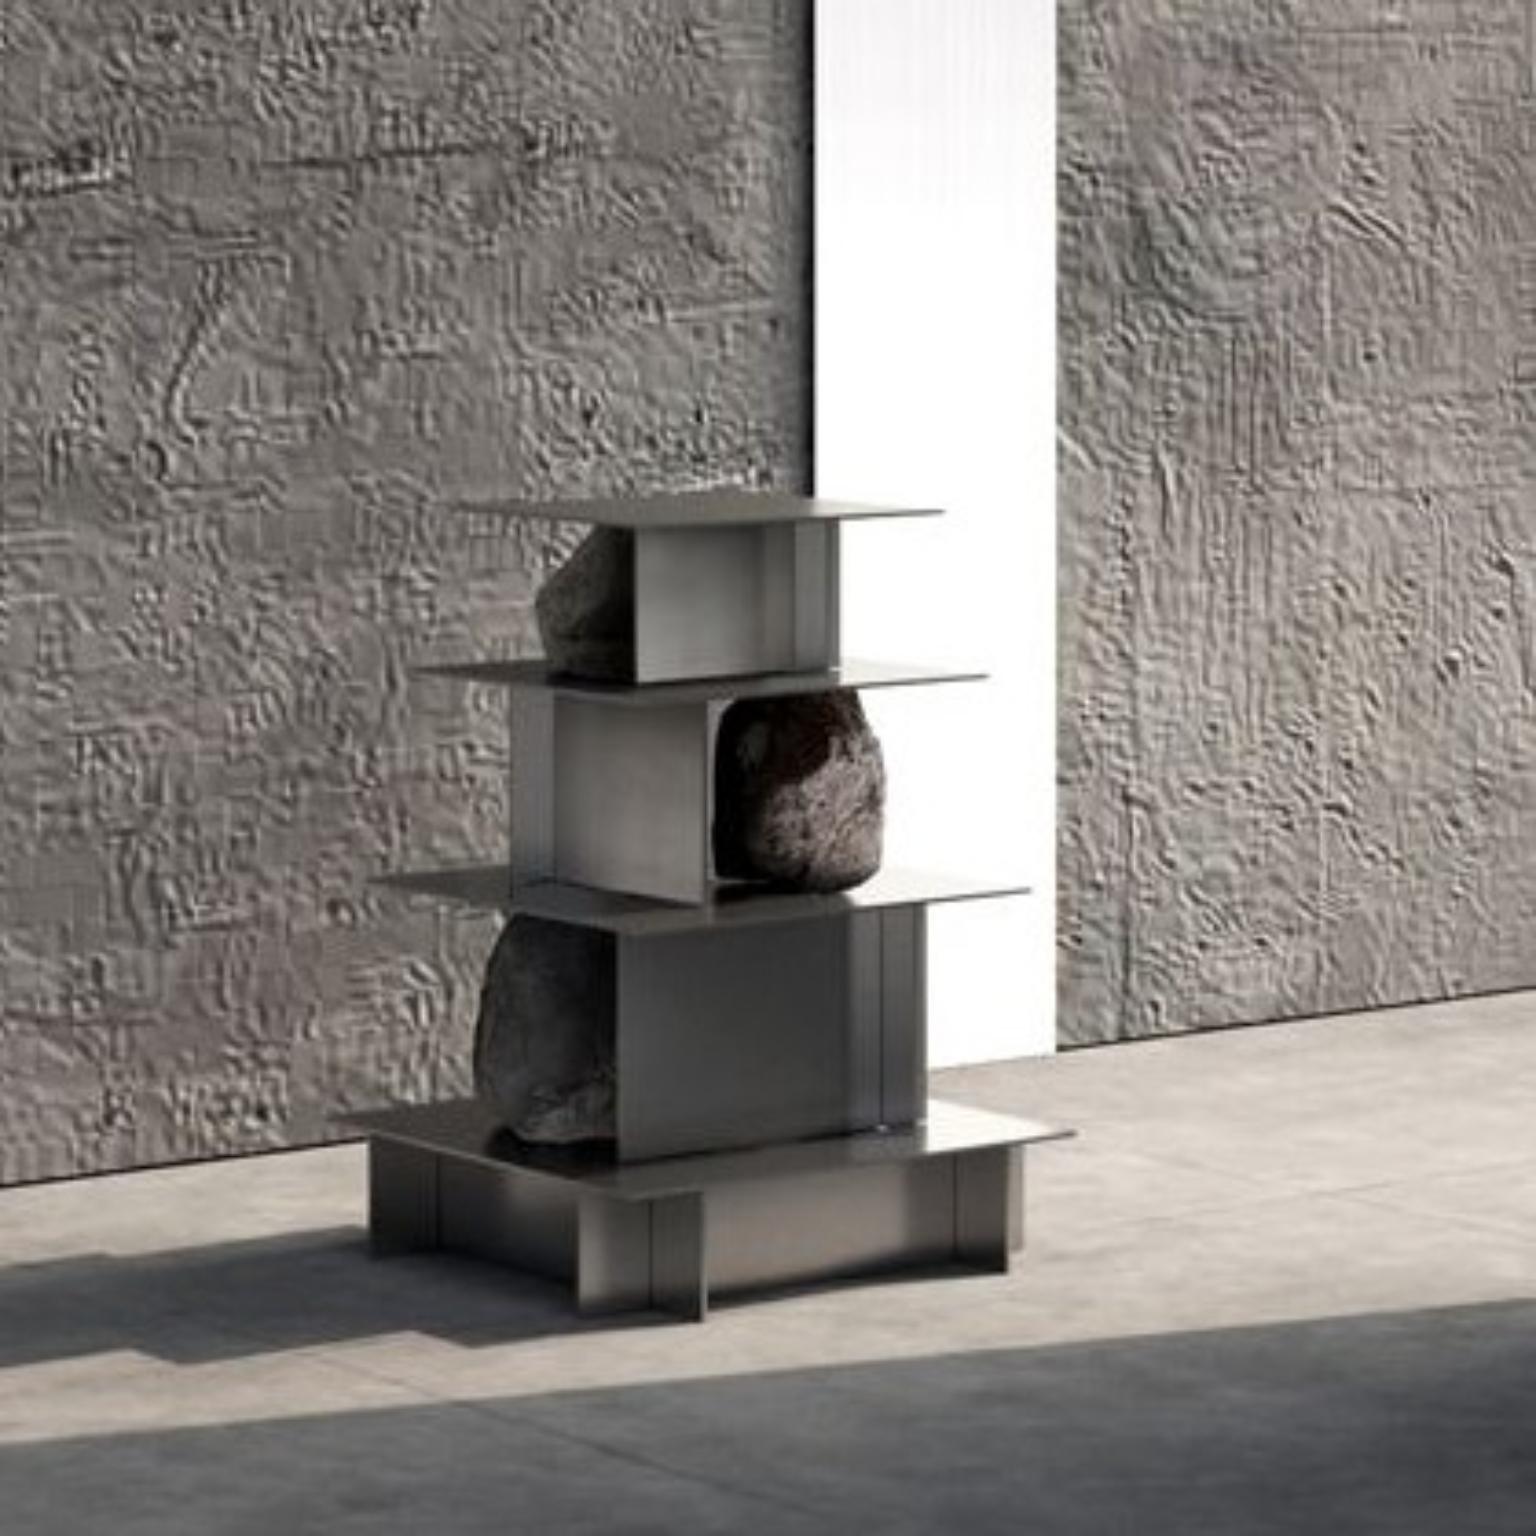 South Korean Proportions of Stone Shelf Level 03 by Lee Sisan